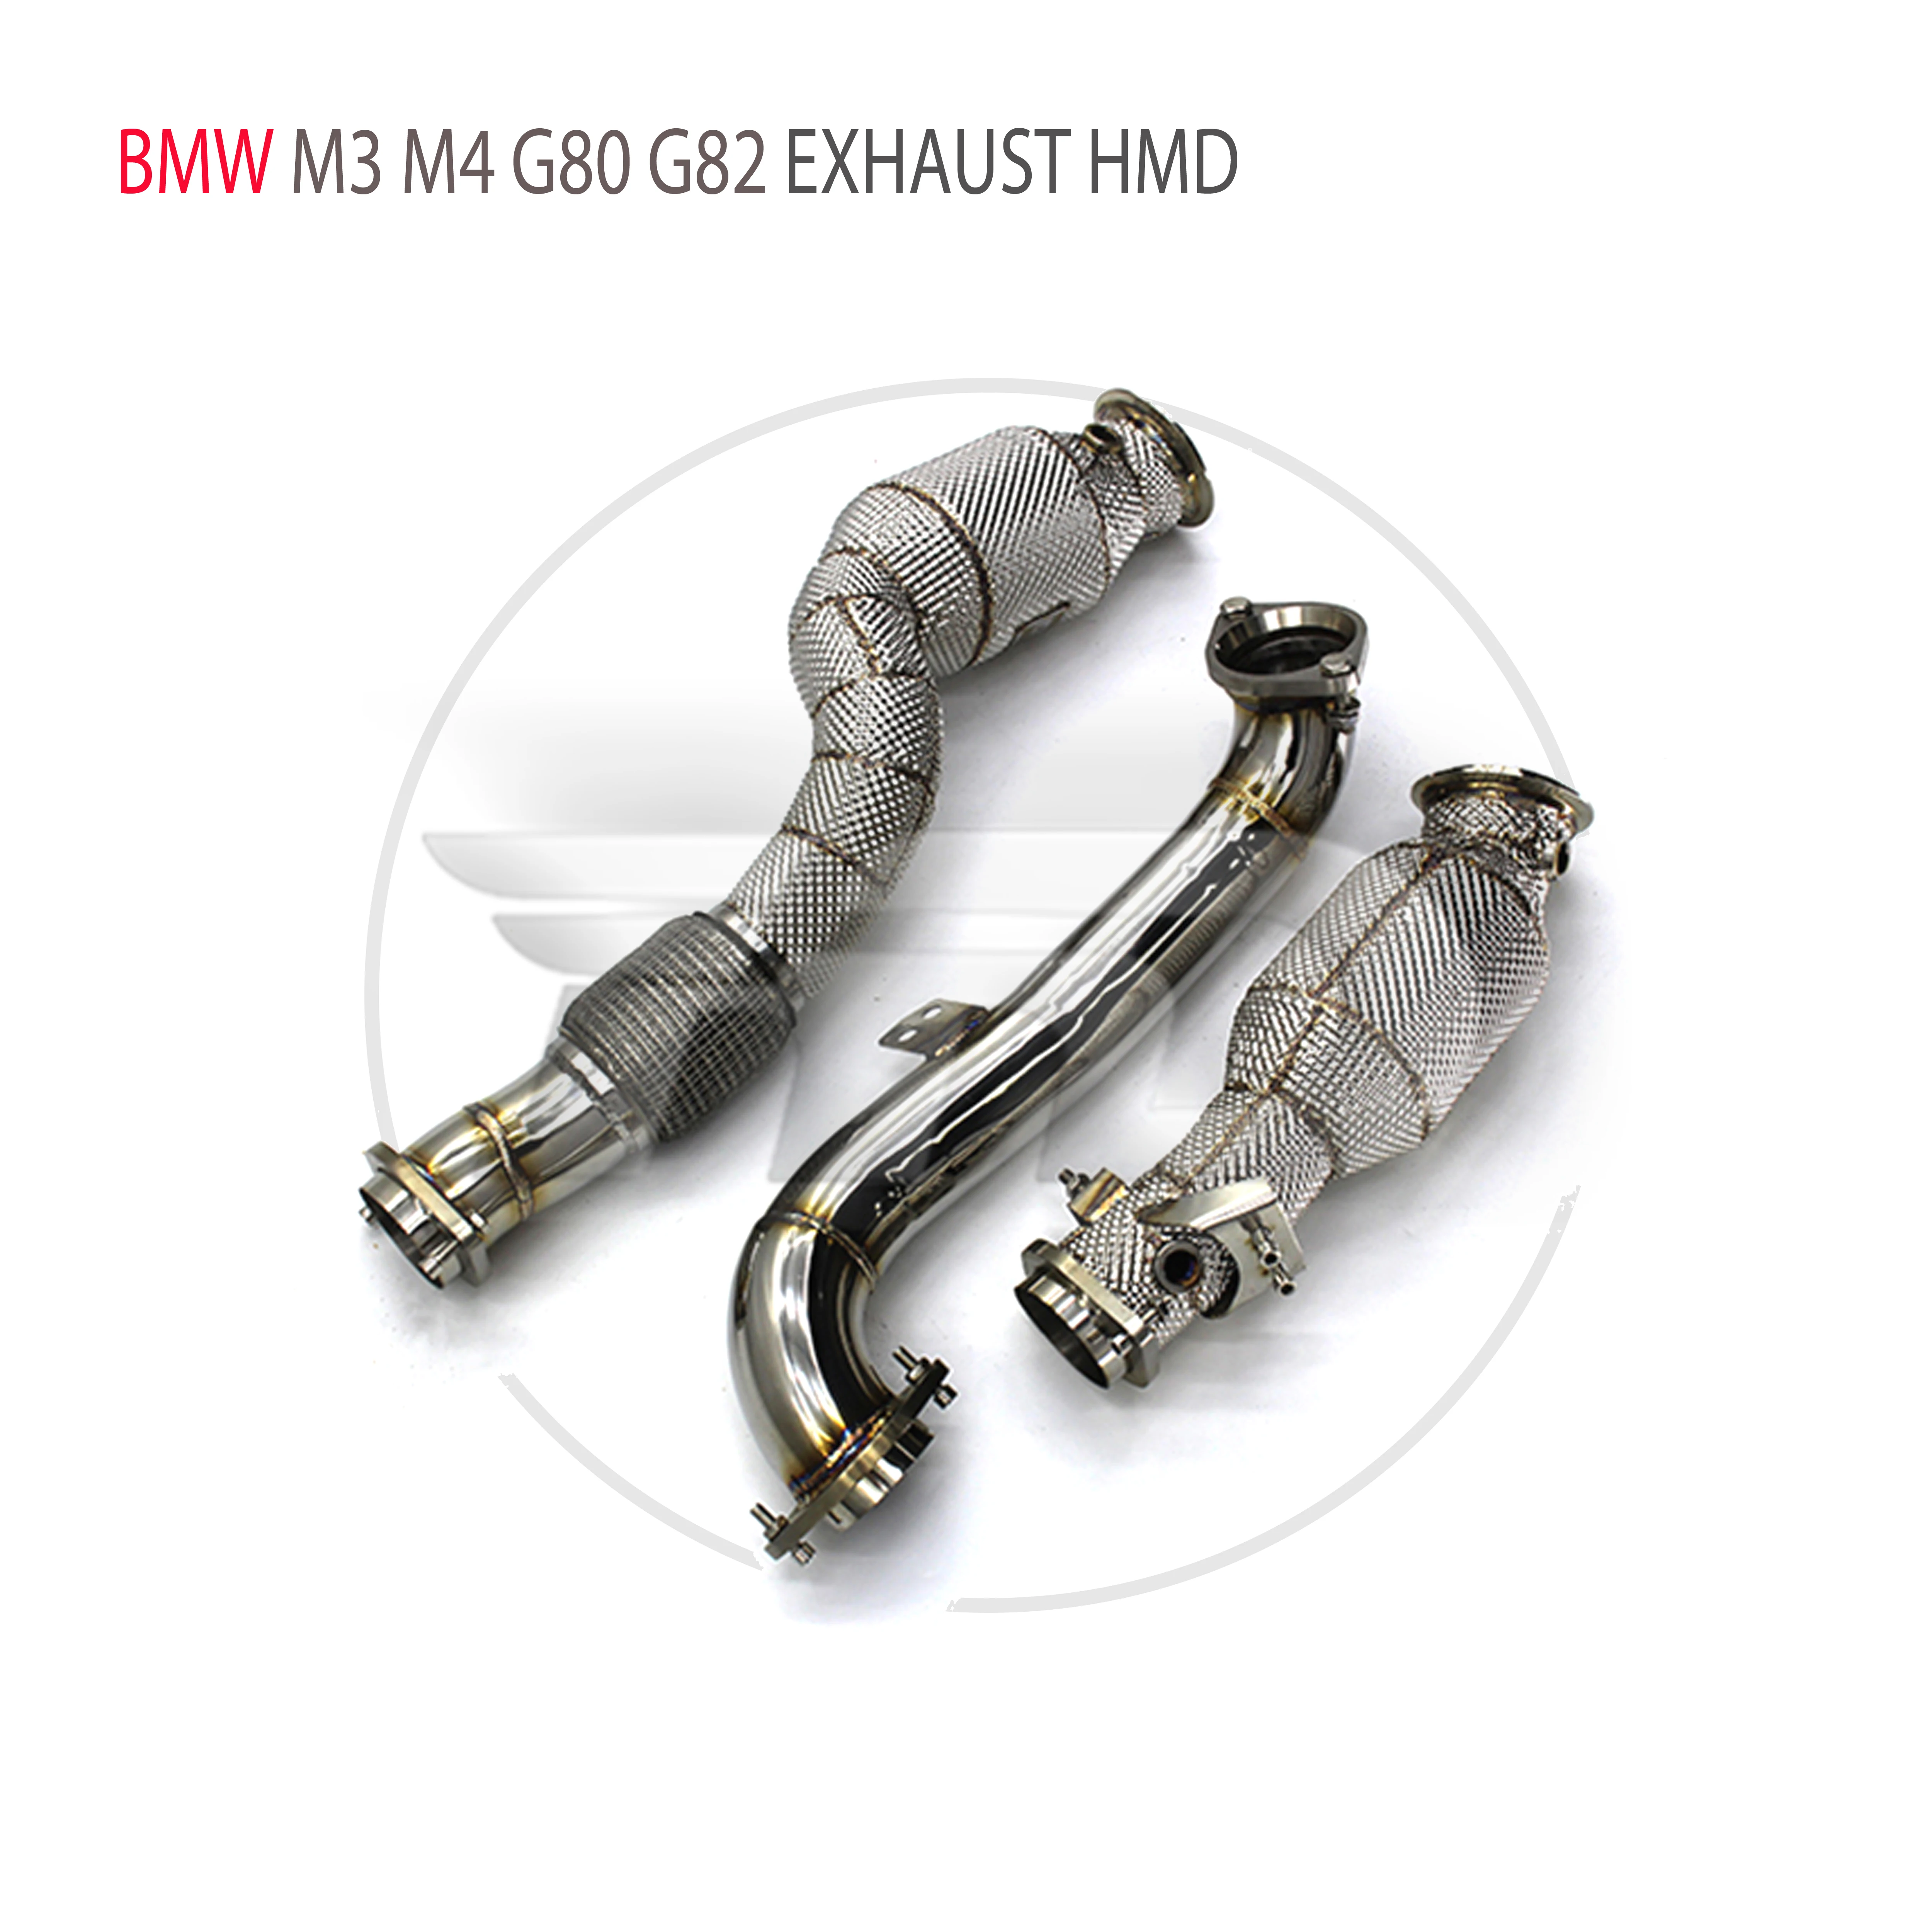 

HMD Exhaust Assembly High Flow Performance Downpipe for BMW M3 M4 Competitio G80 G82 S58 Engine 3.0T Car Accessories